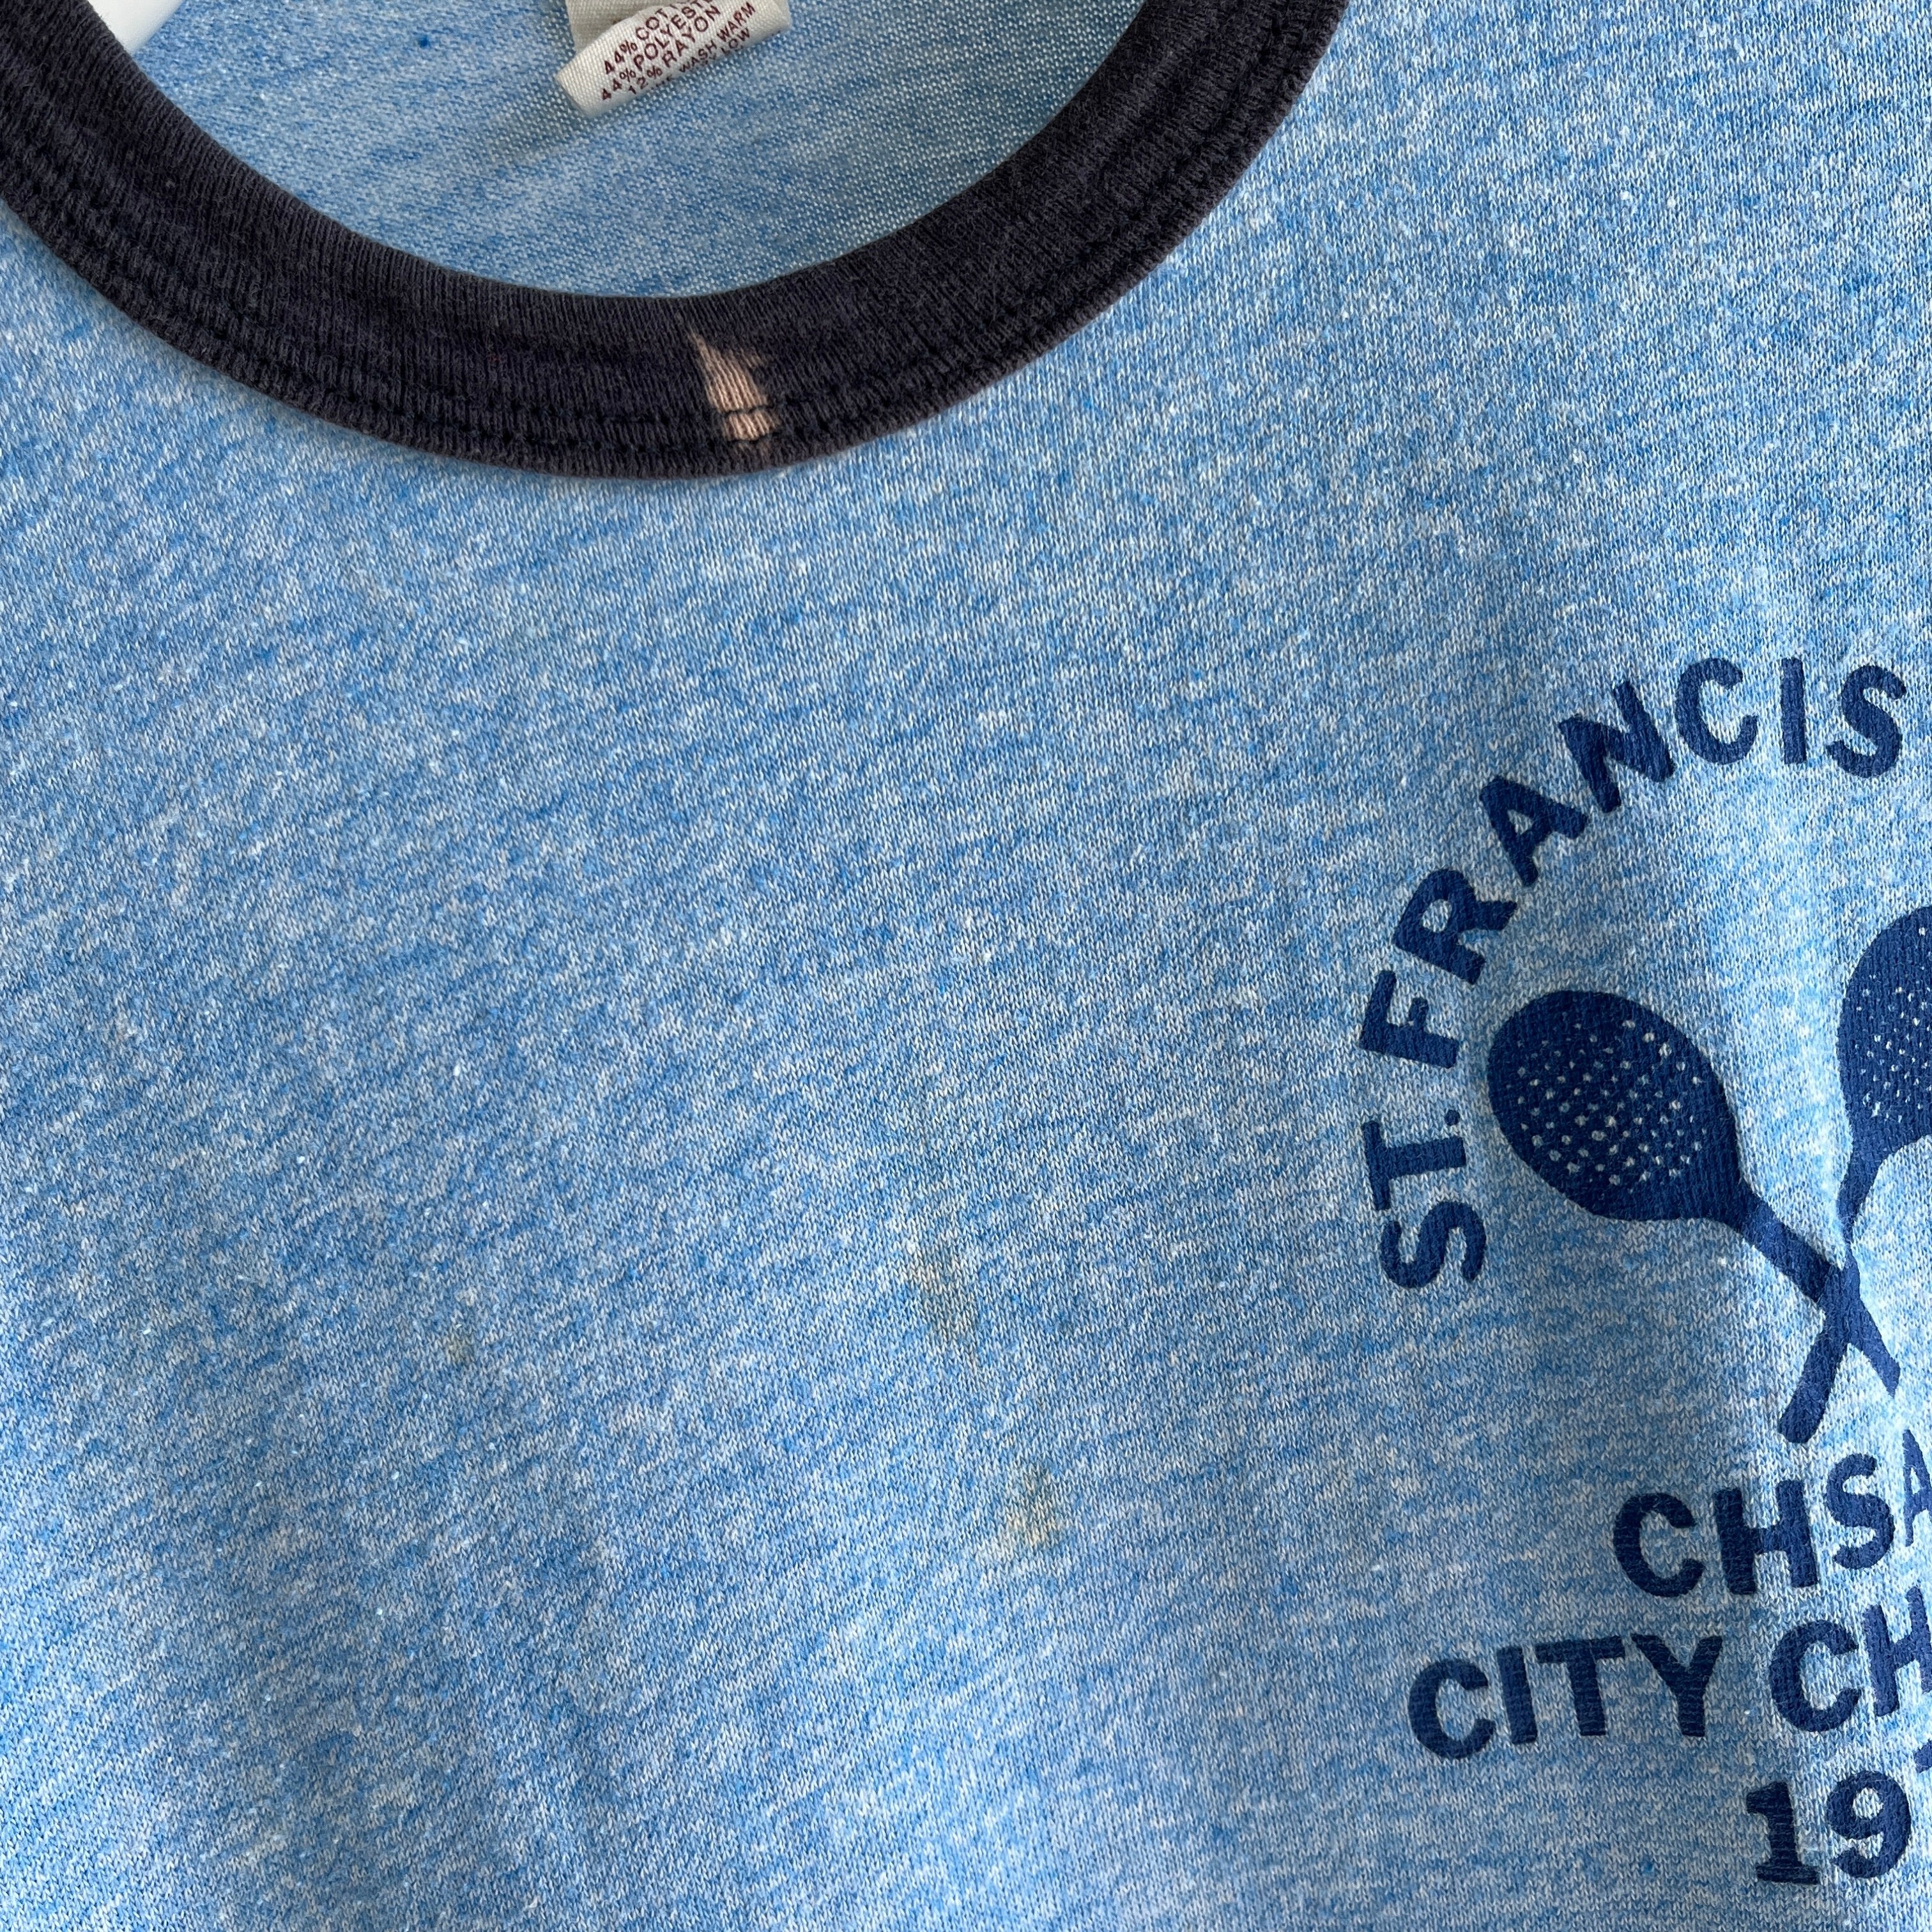 1977 St. Francis Prep CHSAA City Champs Ring T-Shirt by Russell